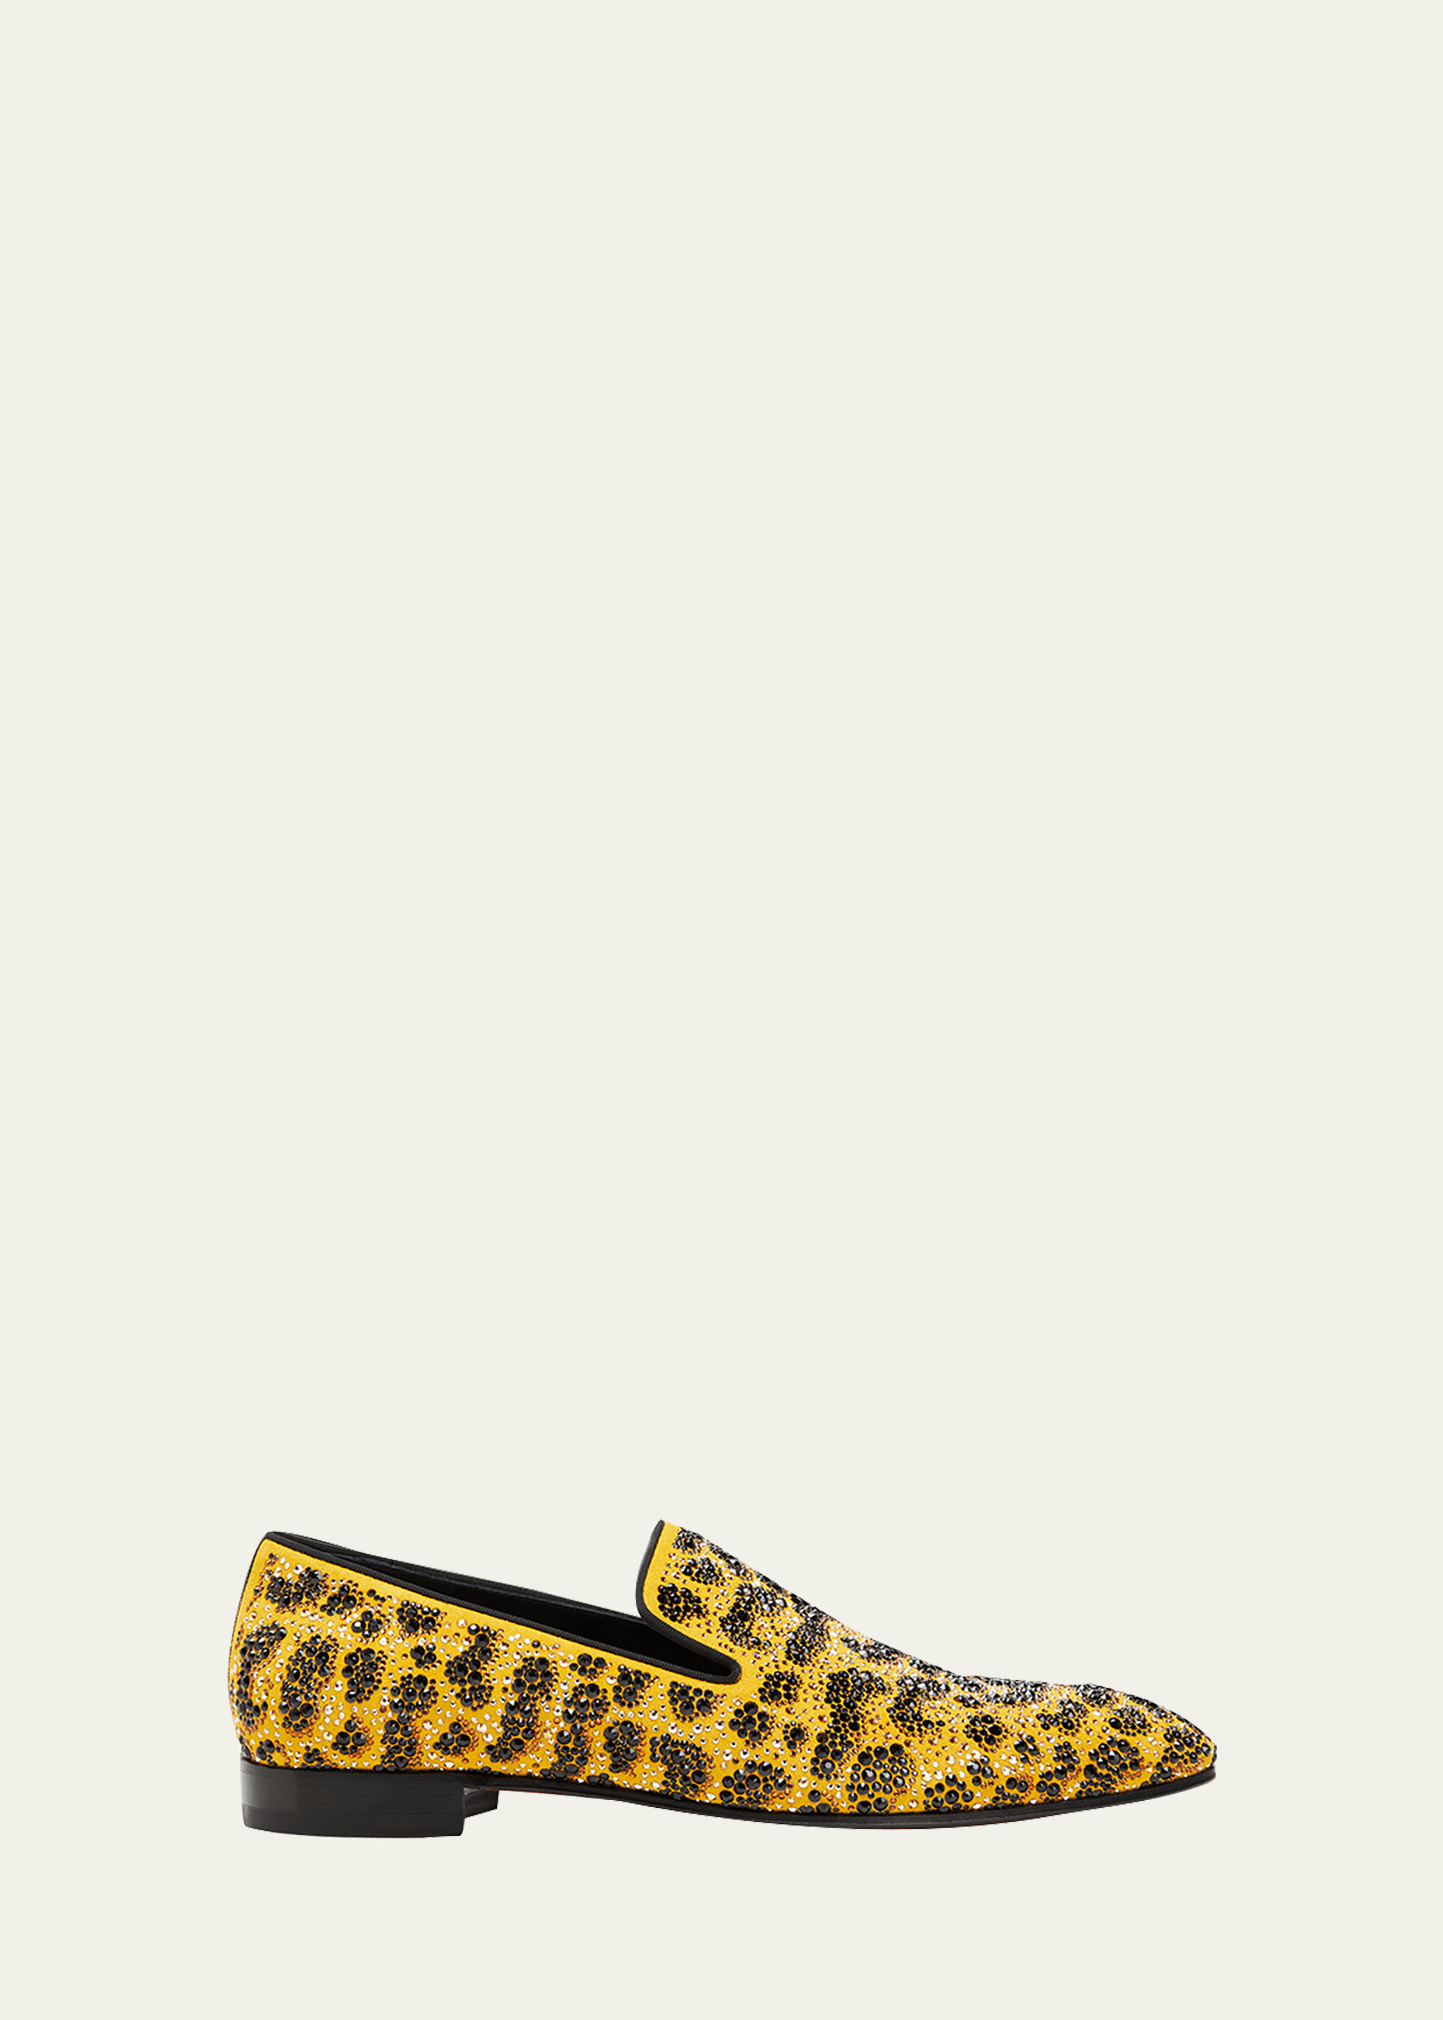 Christian Louboutin Men's Dandelion Crystal-embellished Loafers In Spicy